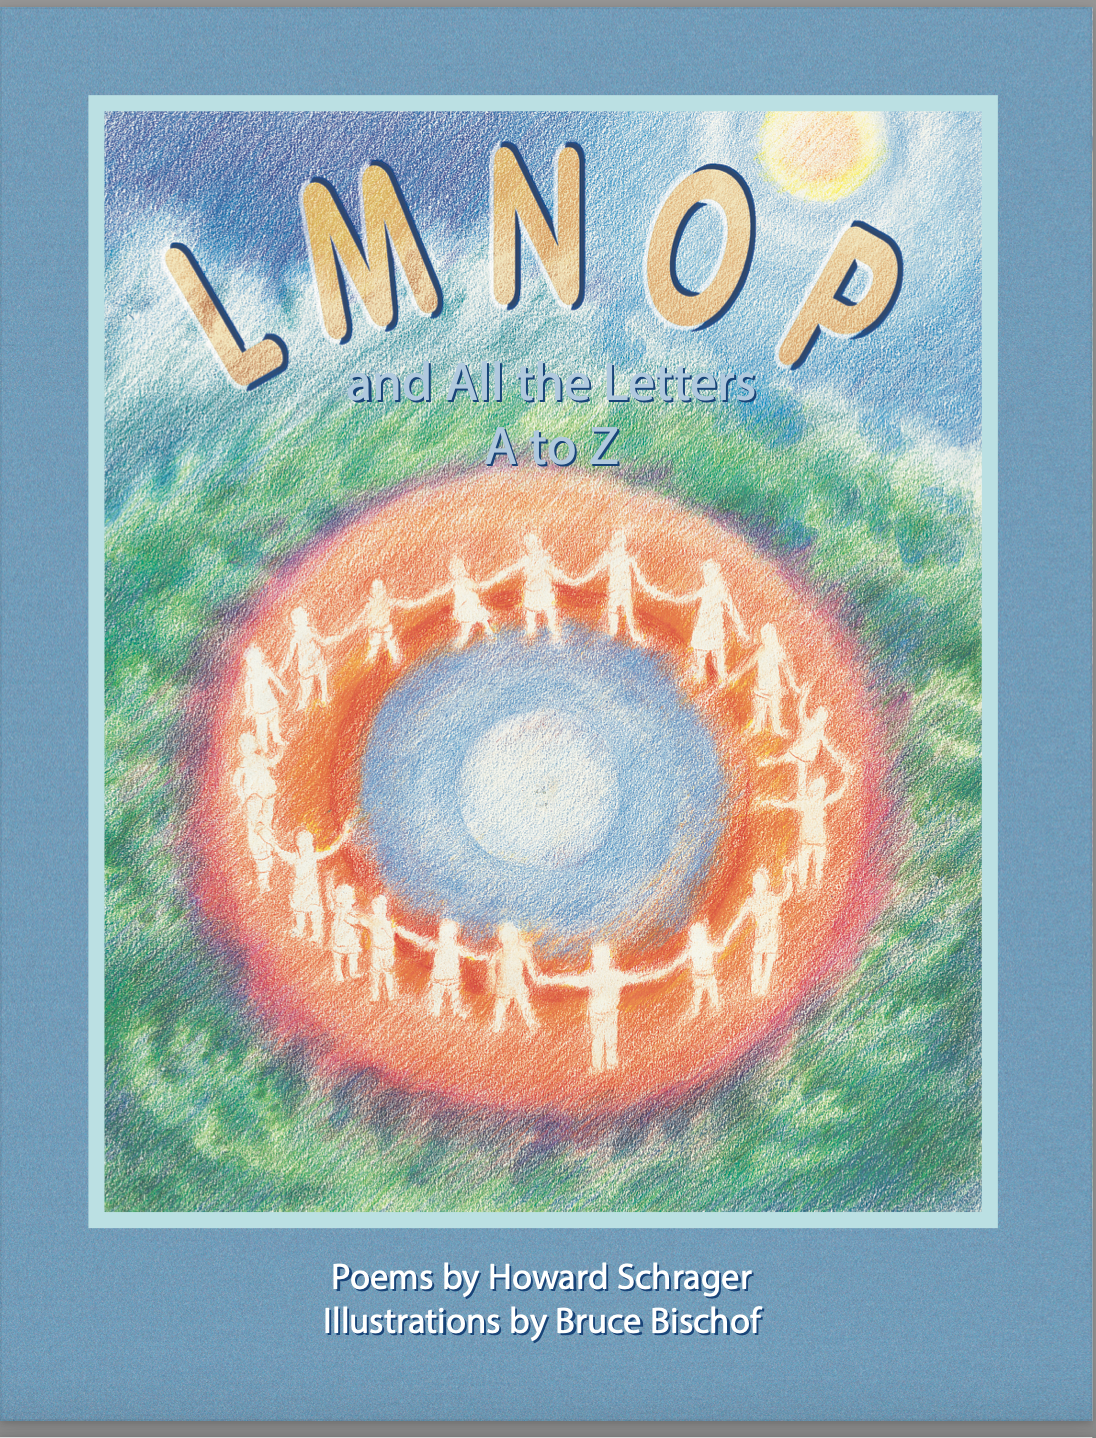 LMNOP and all the letters from A to Z - Hardcover